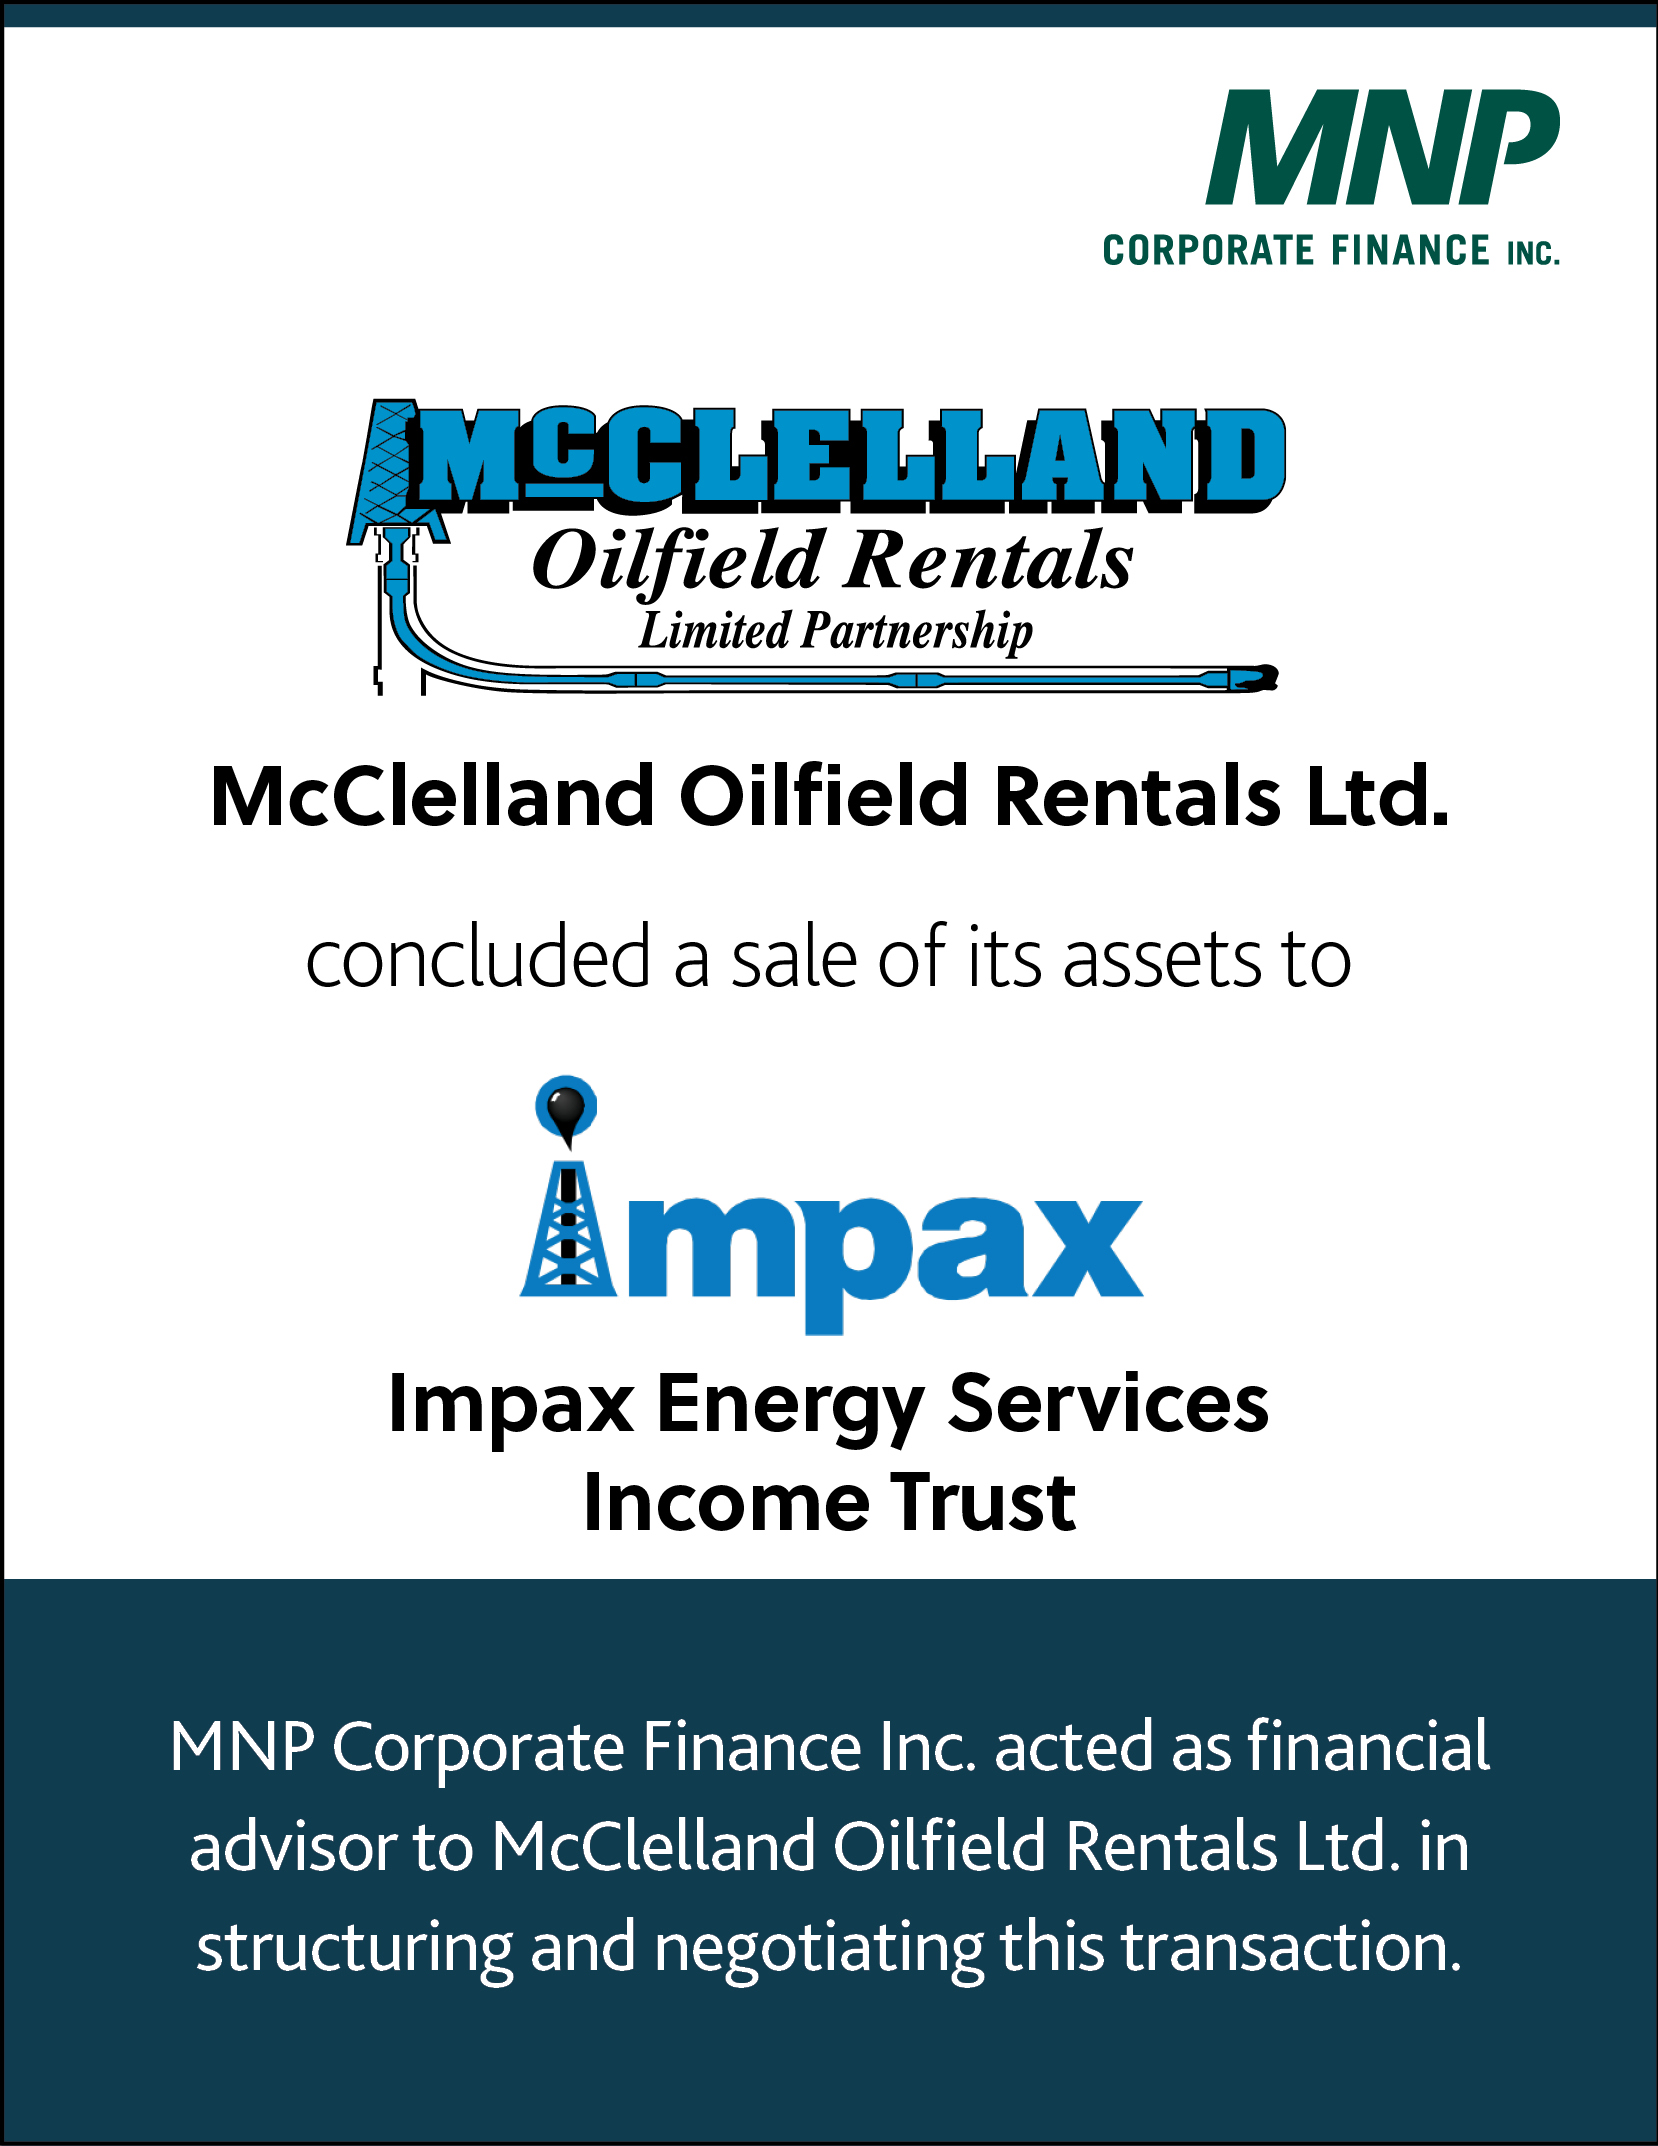 McClelland Oilfield Rentals Ltd concluded a sale of its assets to Impax Energy Services Income Trust